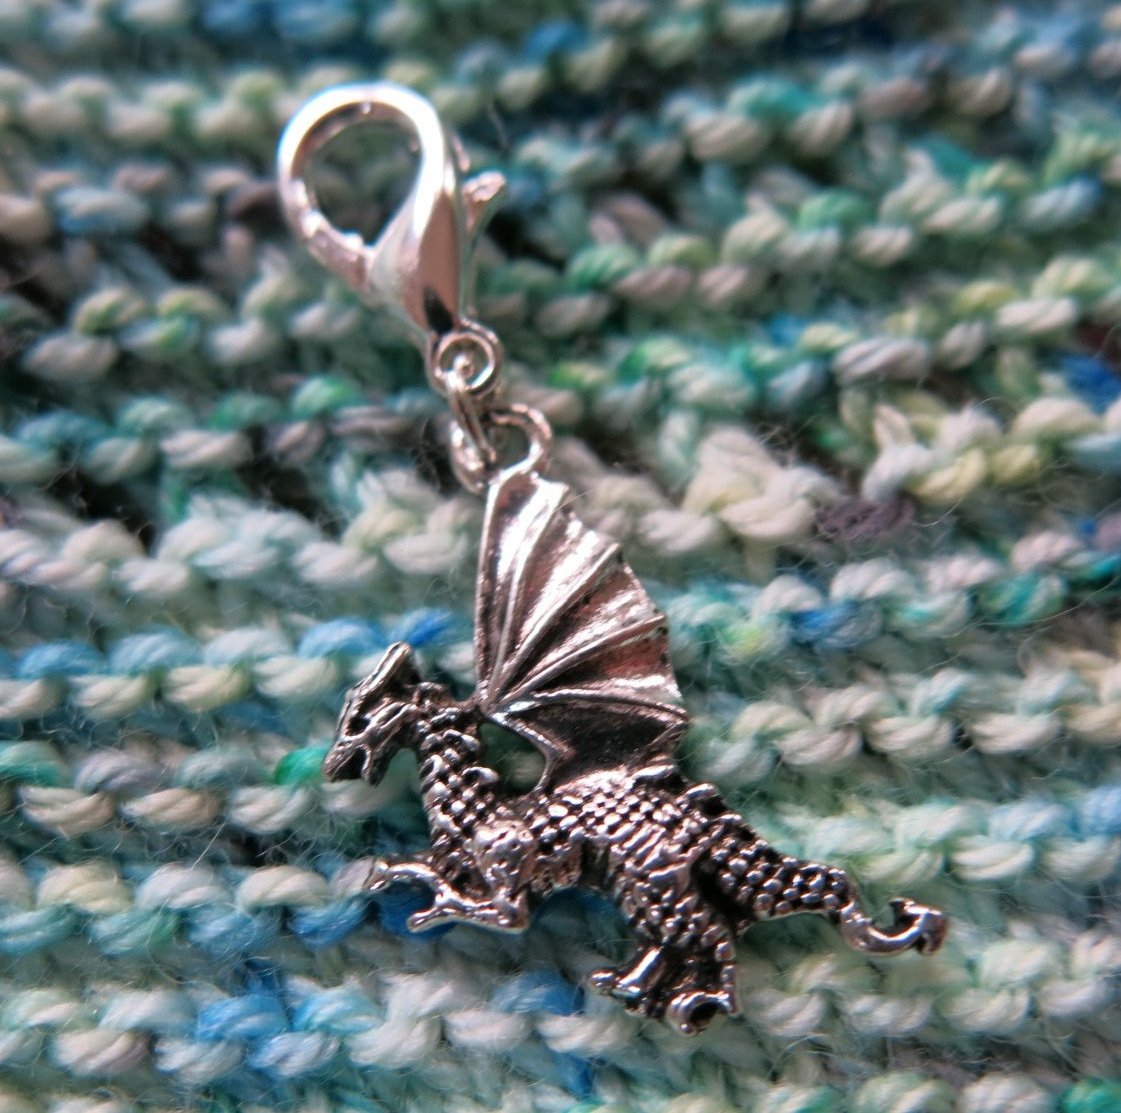 silver dragon charm for bracelets, zippers, bags and crochet